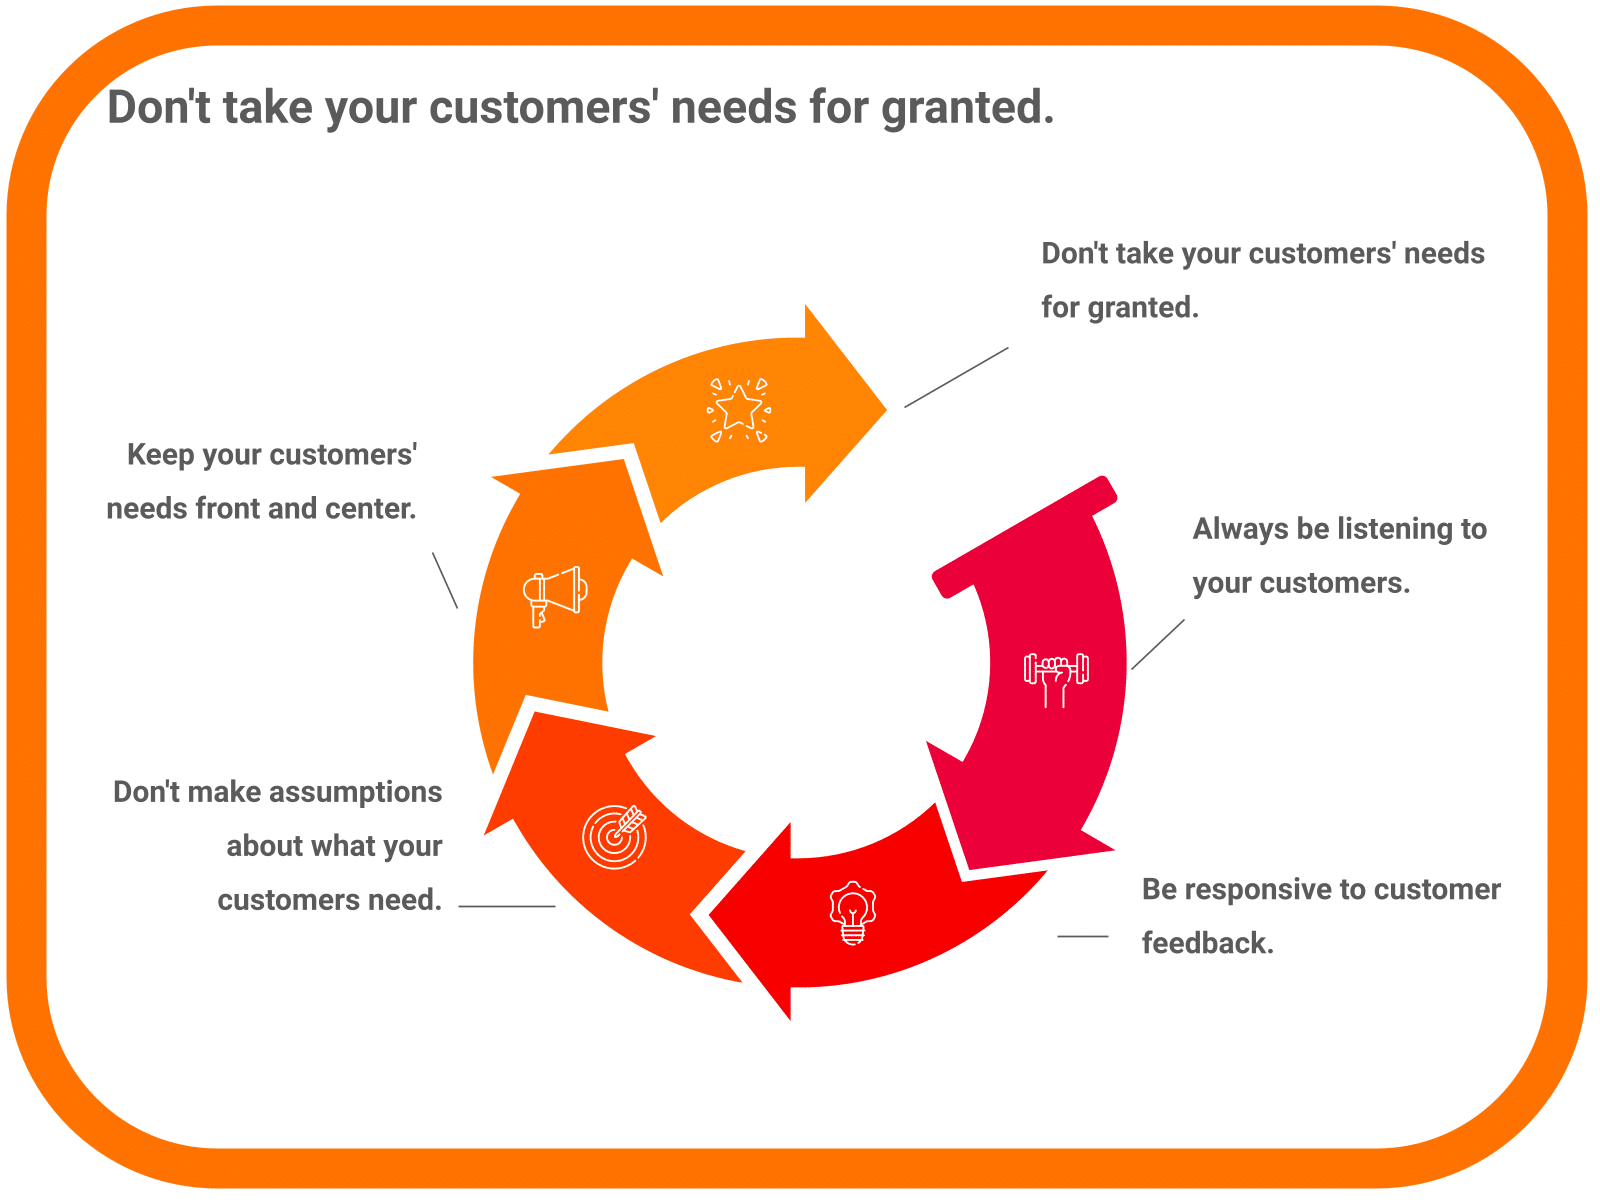 Don’t take your customers’ needs for granted.